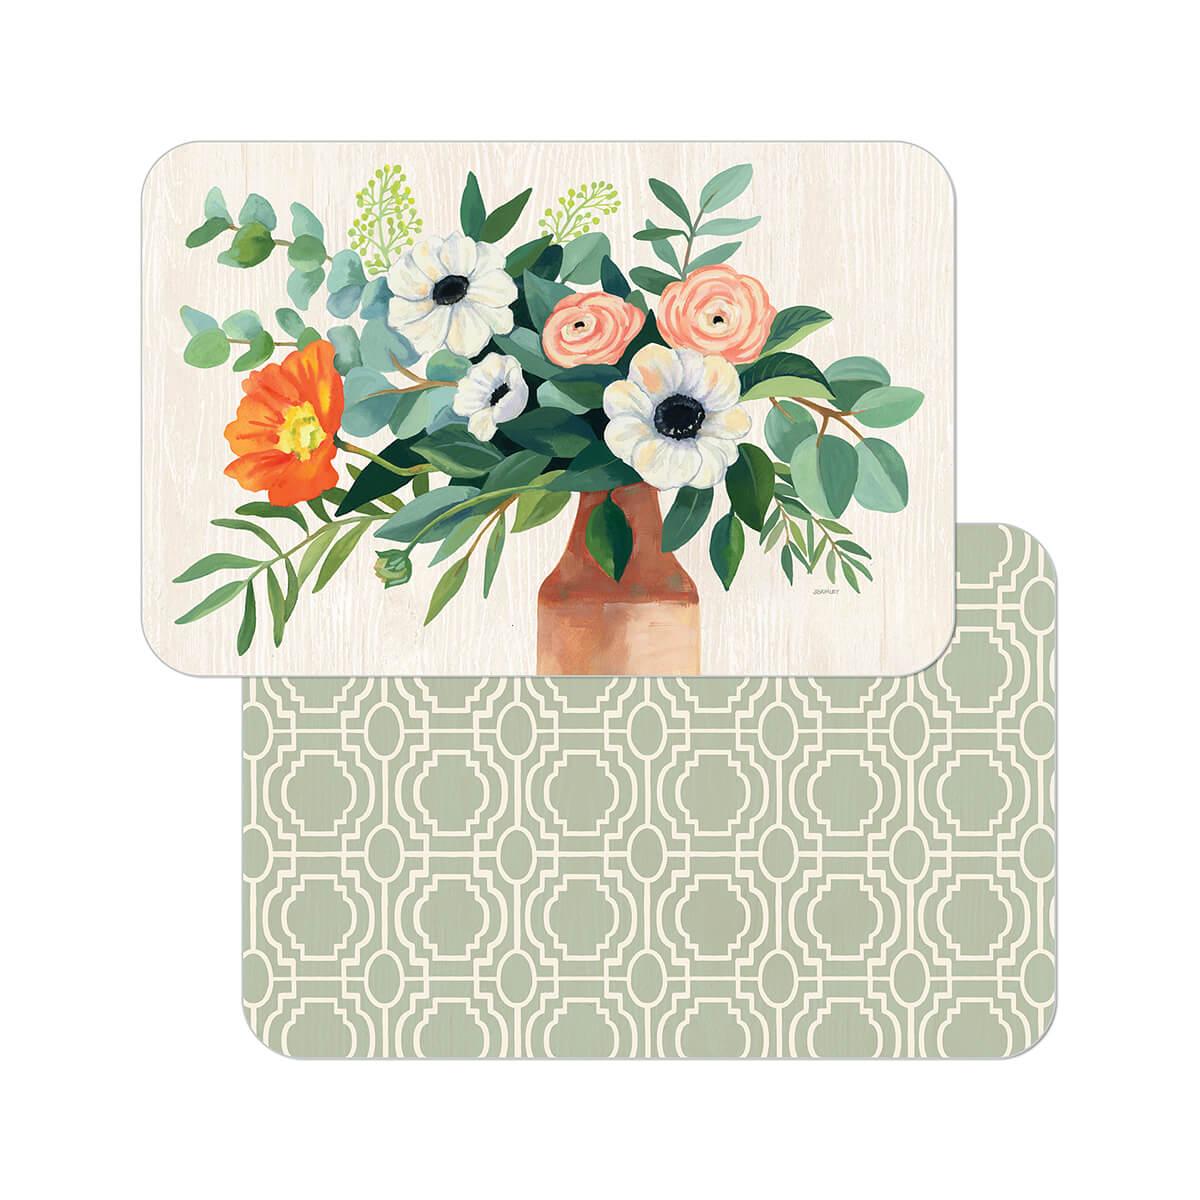  Reversible Placemat - Fresh Poppies